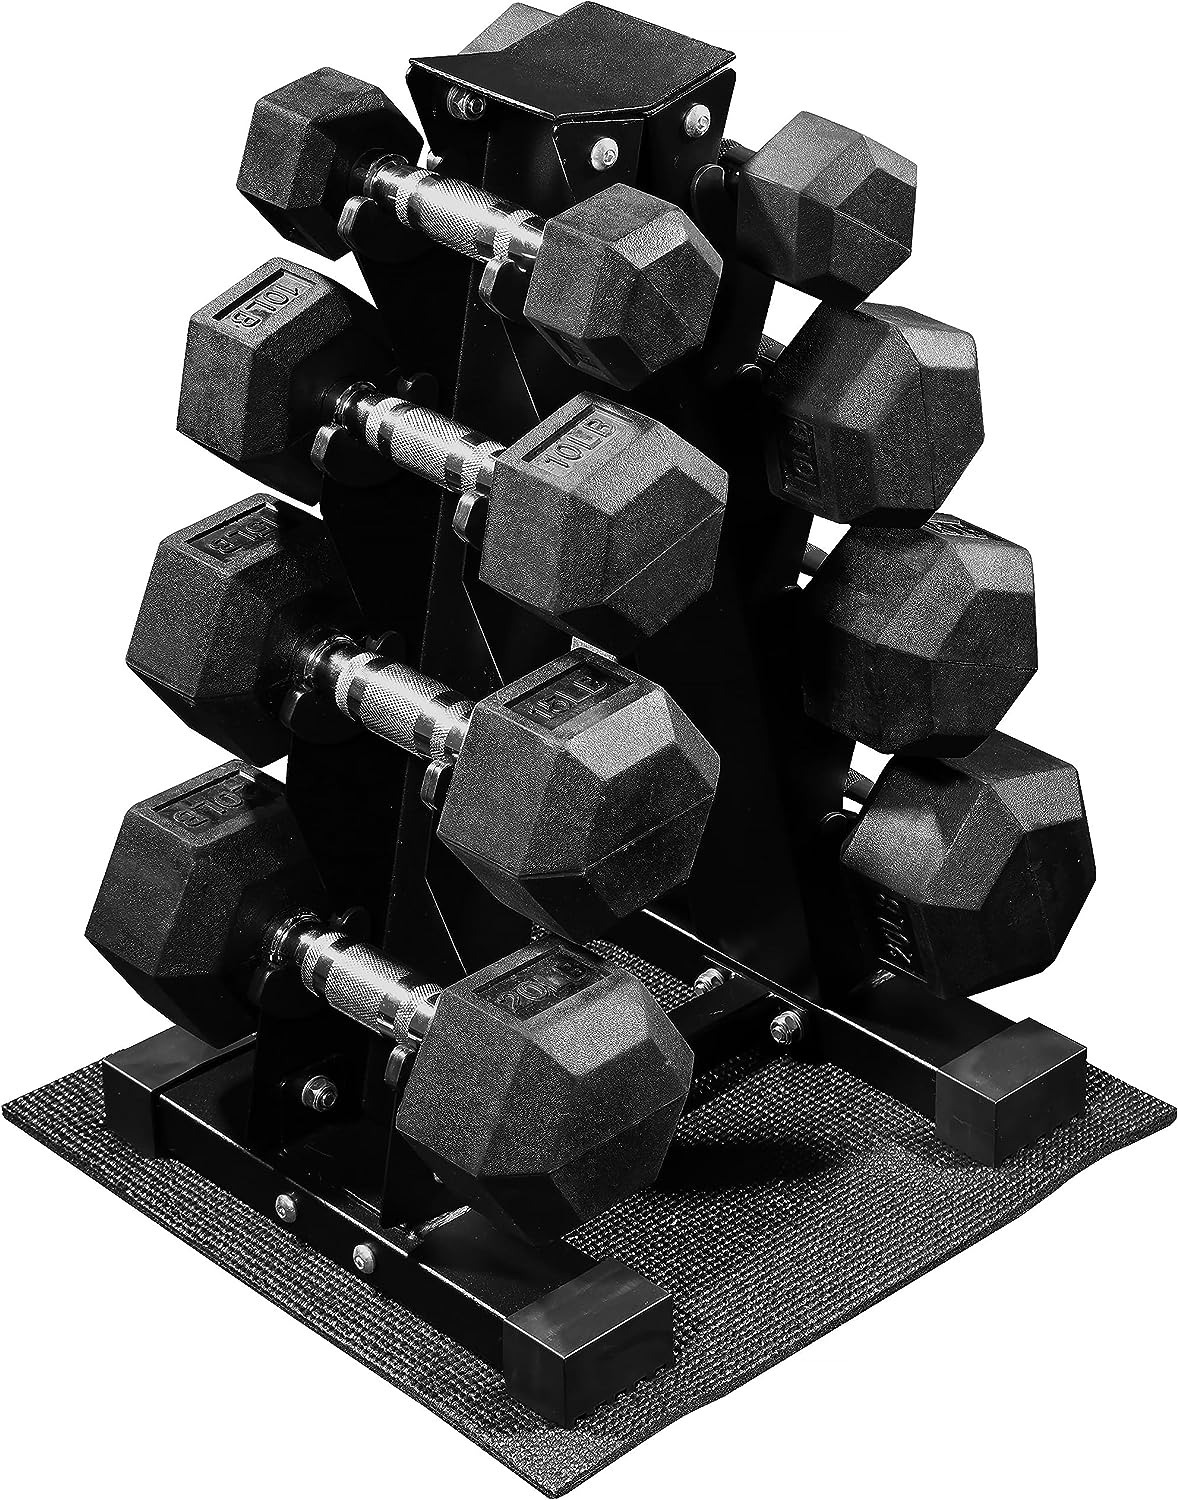 100lb Signature Fitness Rubber Coated Hex Dumbbell Weight Set & Storage Rack $100 + Free Shipping